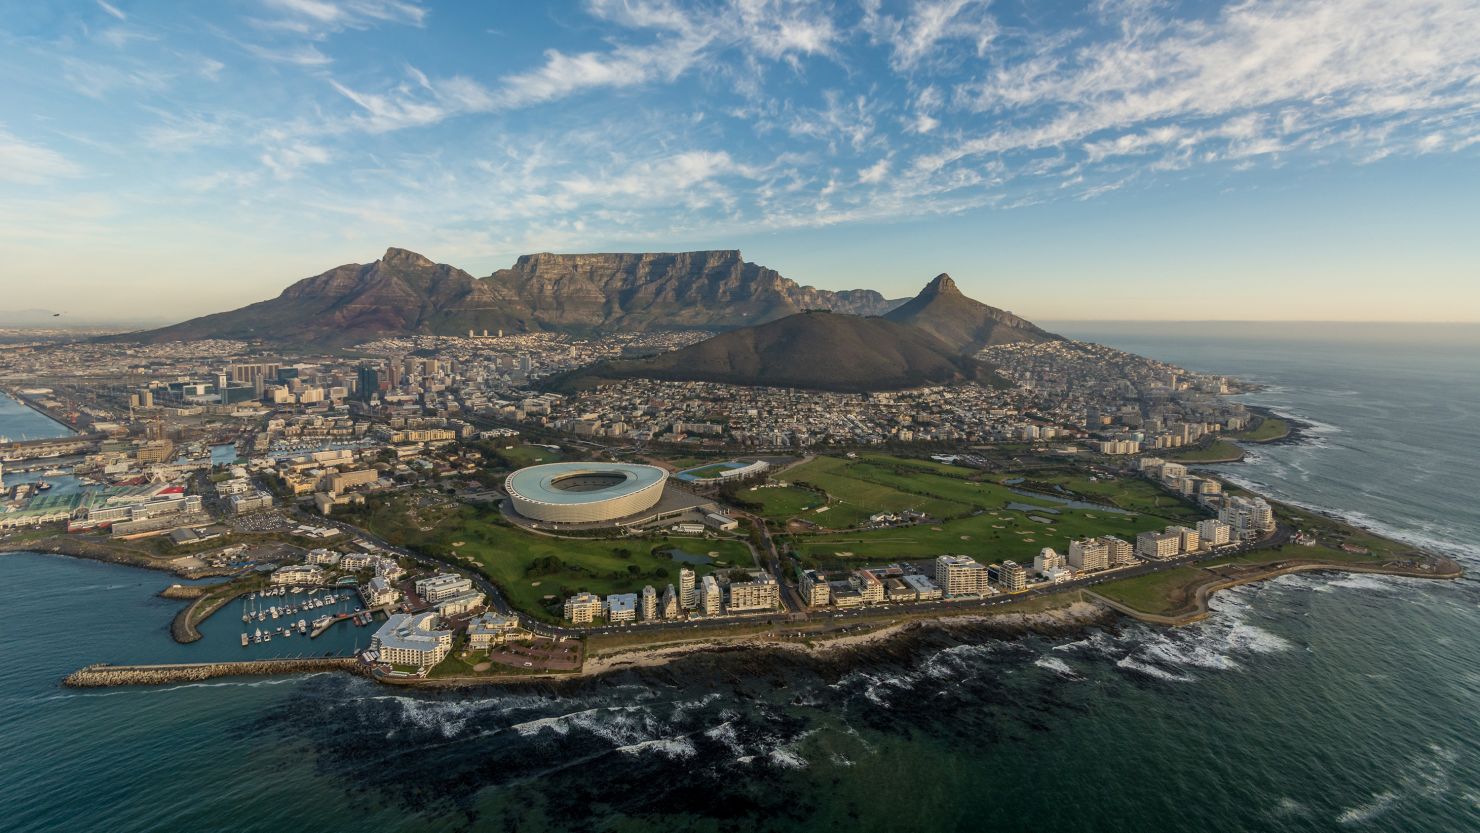 Cape Town is one of the world's most striking cities.